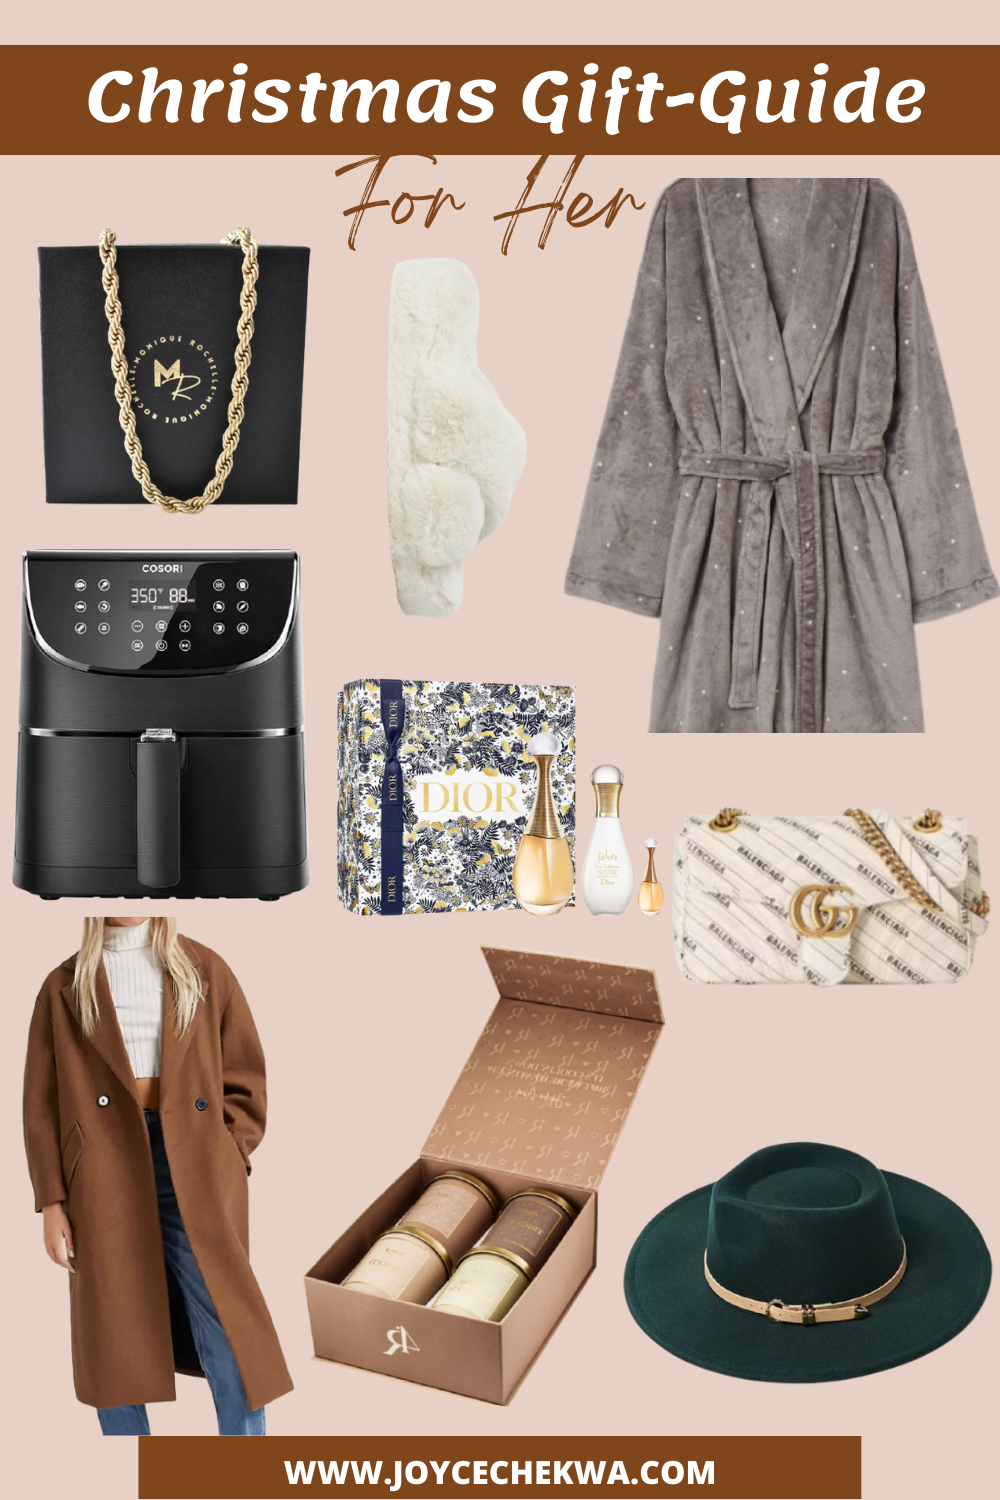 7 LAST-MINUTE GIFT IDEAS PERFECT FOR EVERY WOMAN